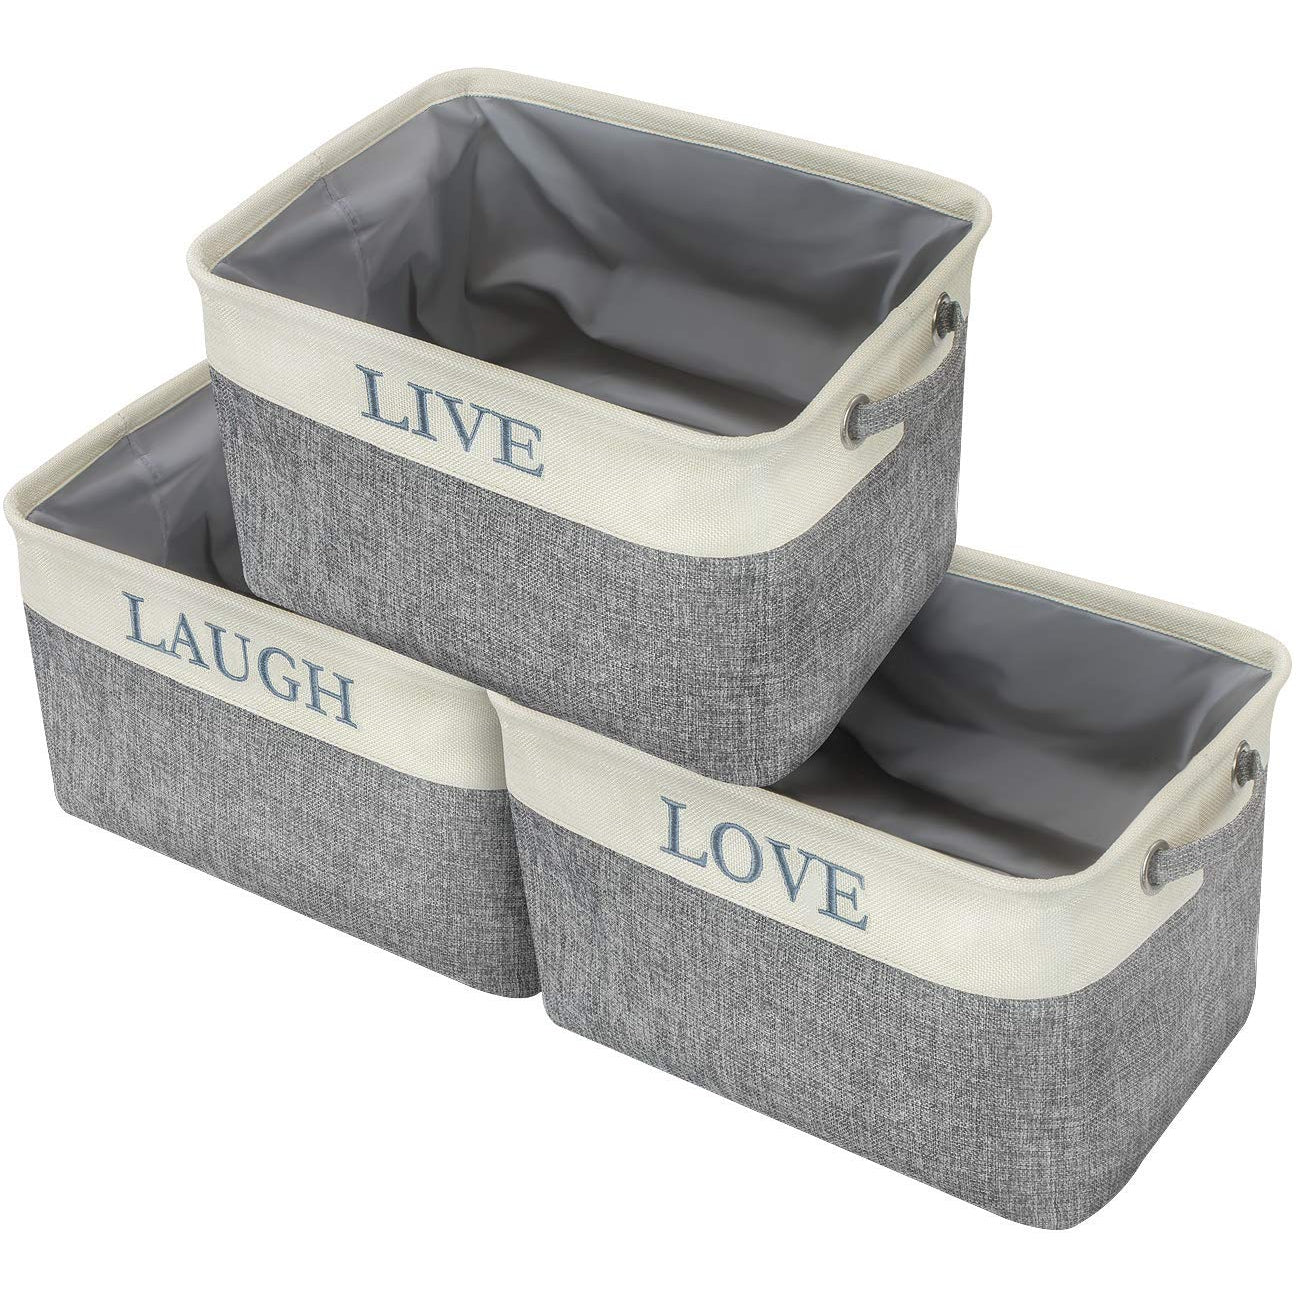 Twill Storage Basket Set - "LIVE, LOVE, LAUGH" - (Uppercase Text) - Sorbus Home